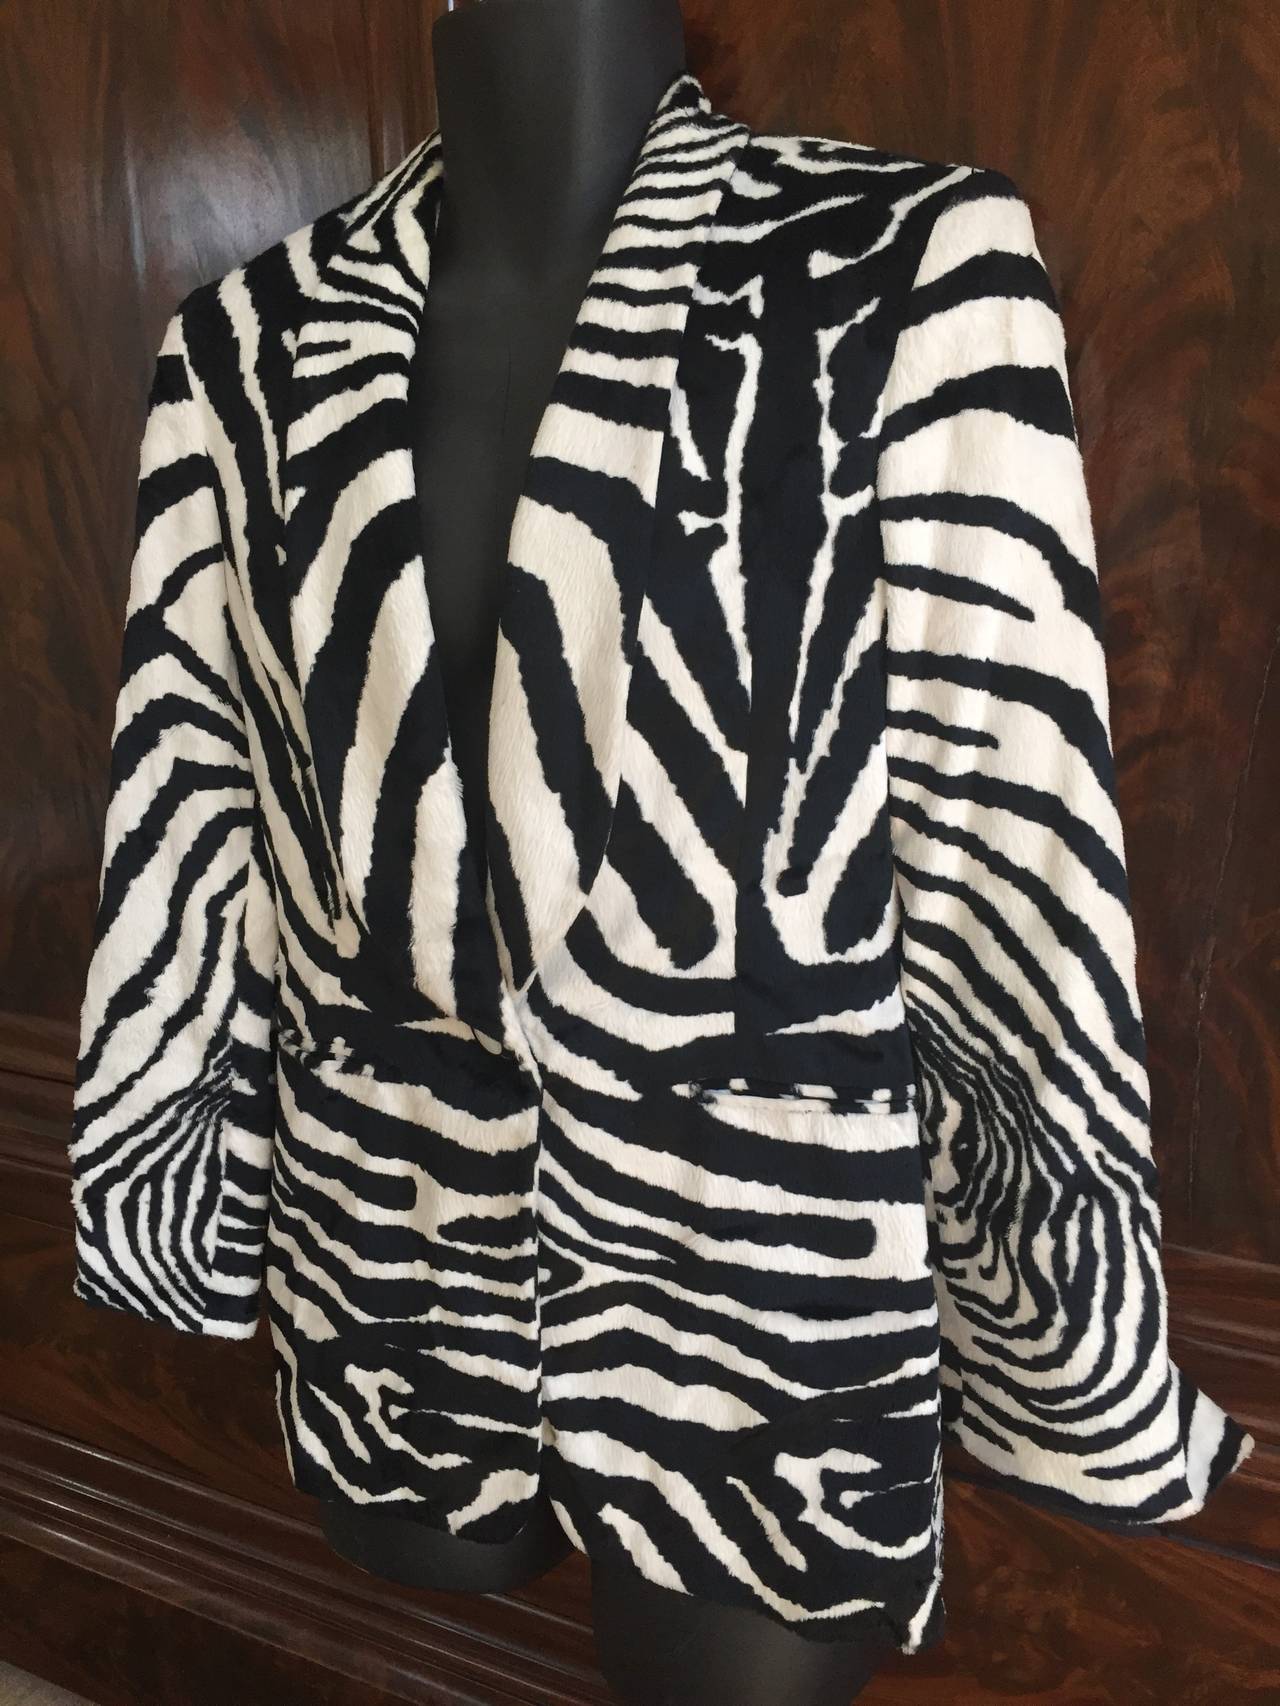 Wonderful zebra pattern jacket from Gianfranco Ferre.
Made of a luxurious cotton blend plush, like a thick velvet or stuffed animal.